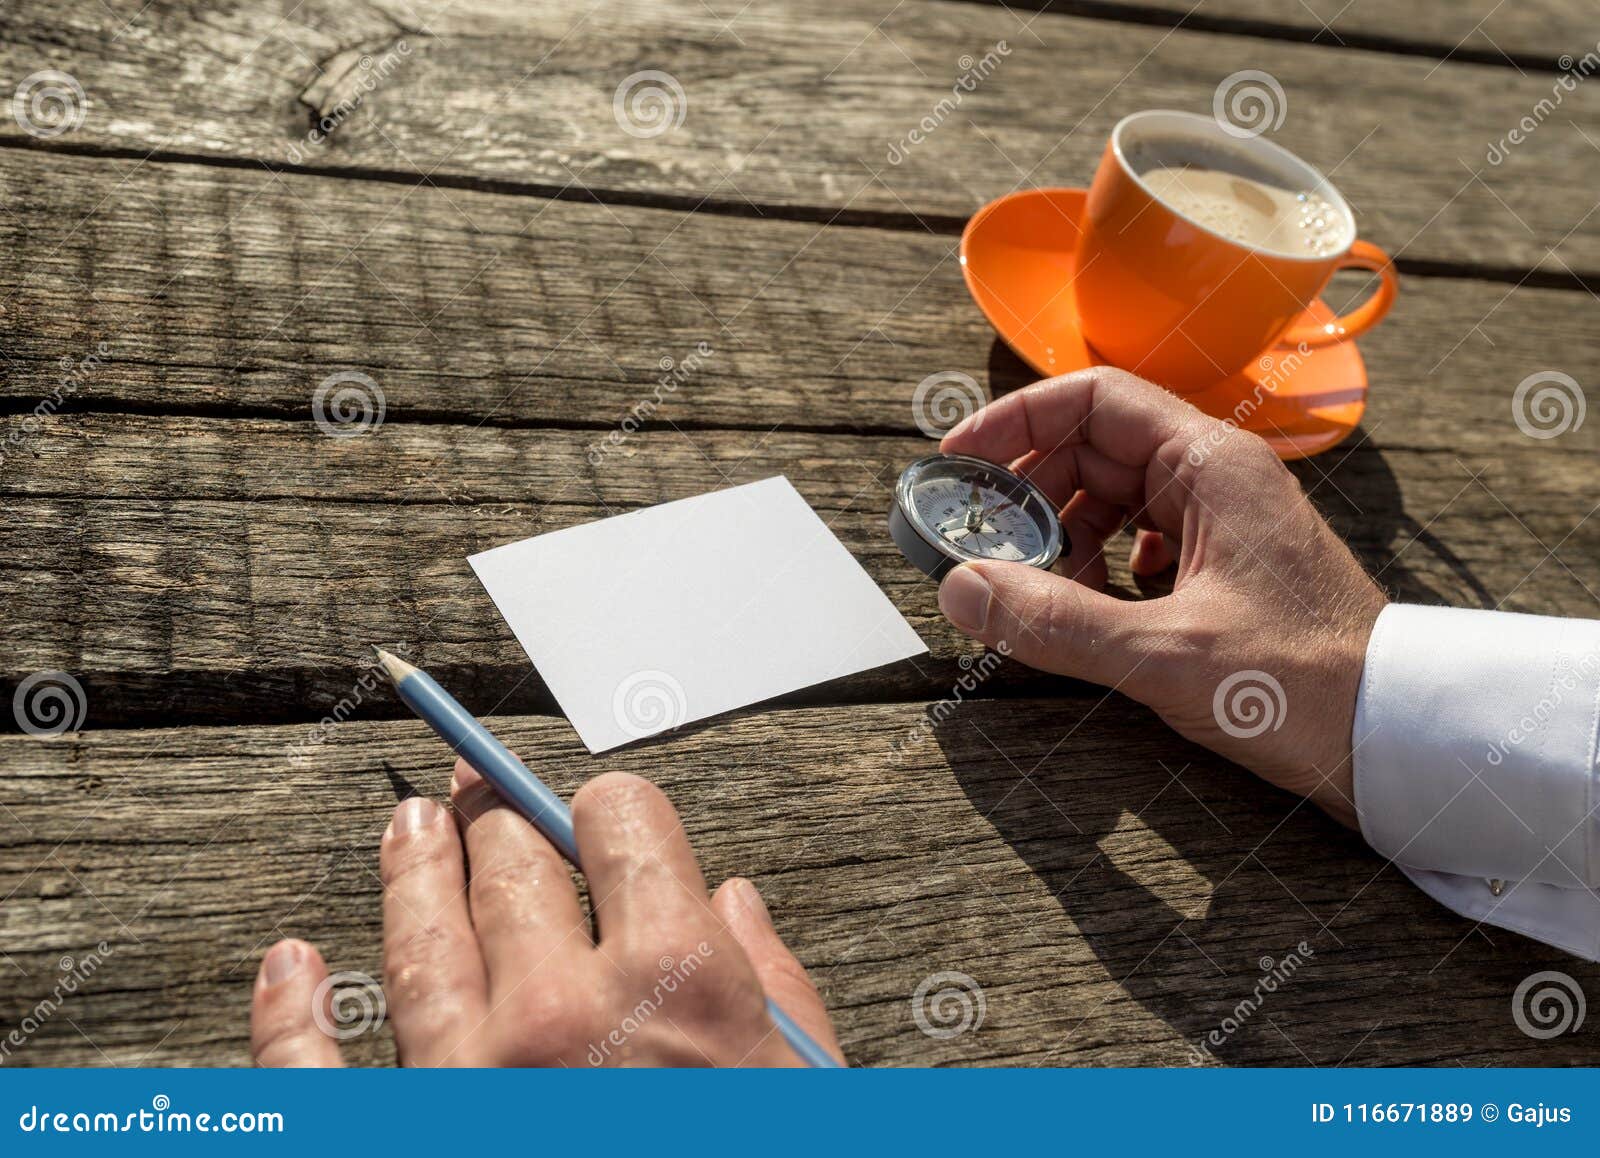 man holding compass and pencil ready to write on blank paper